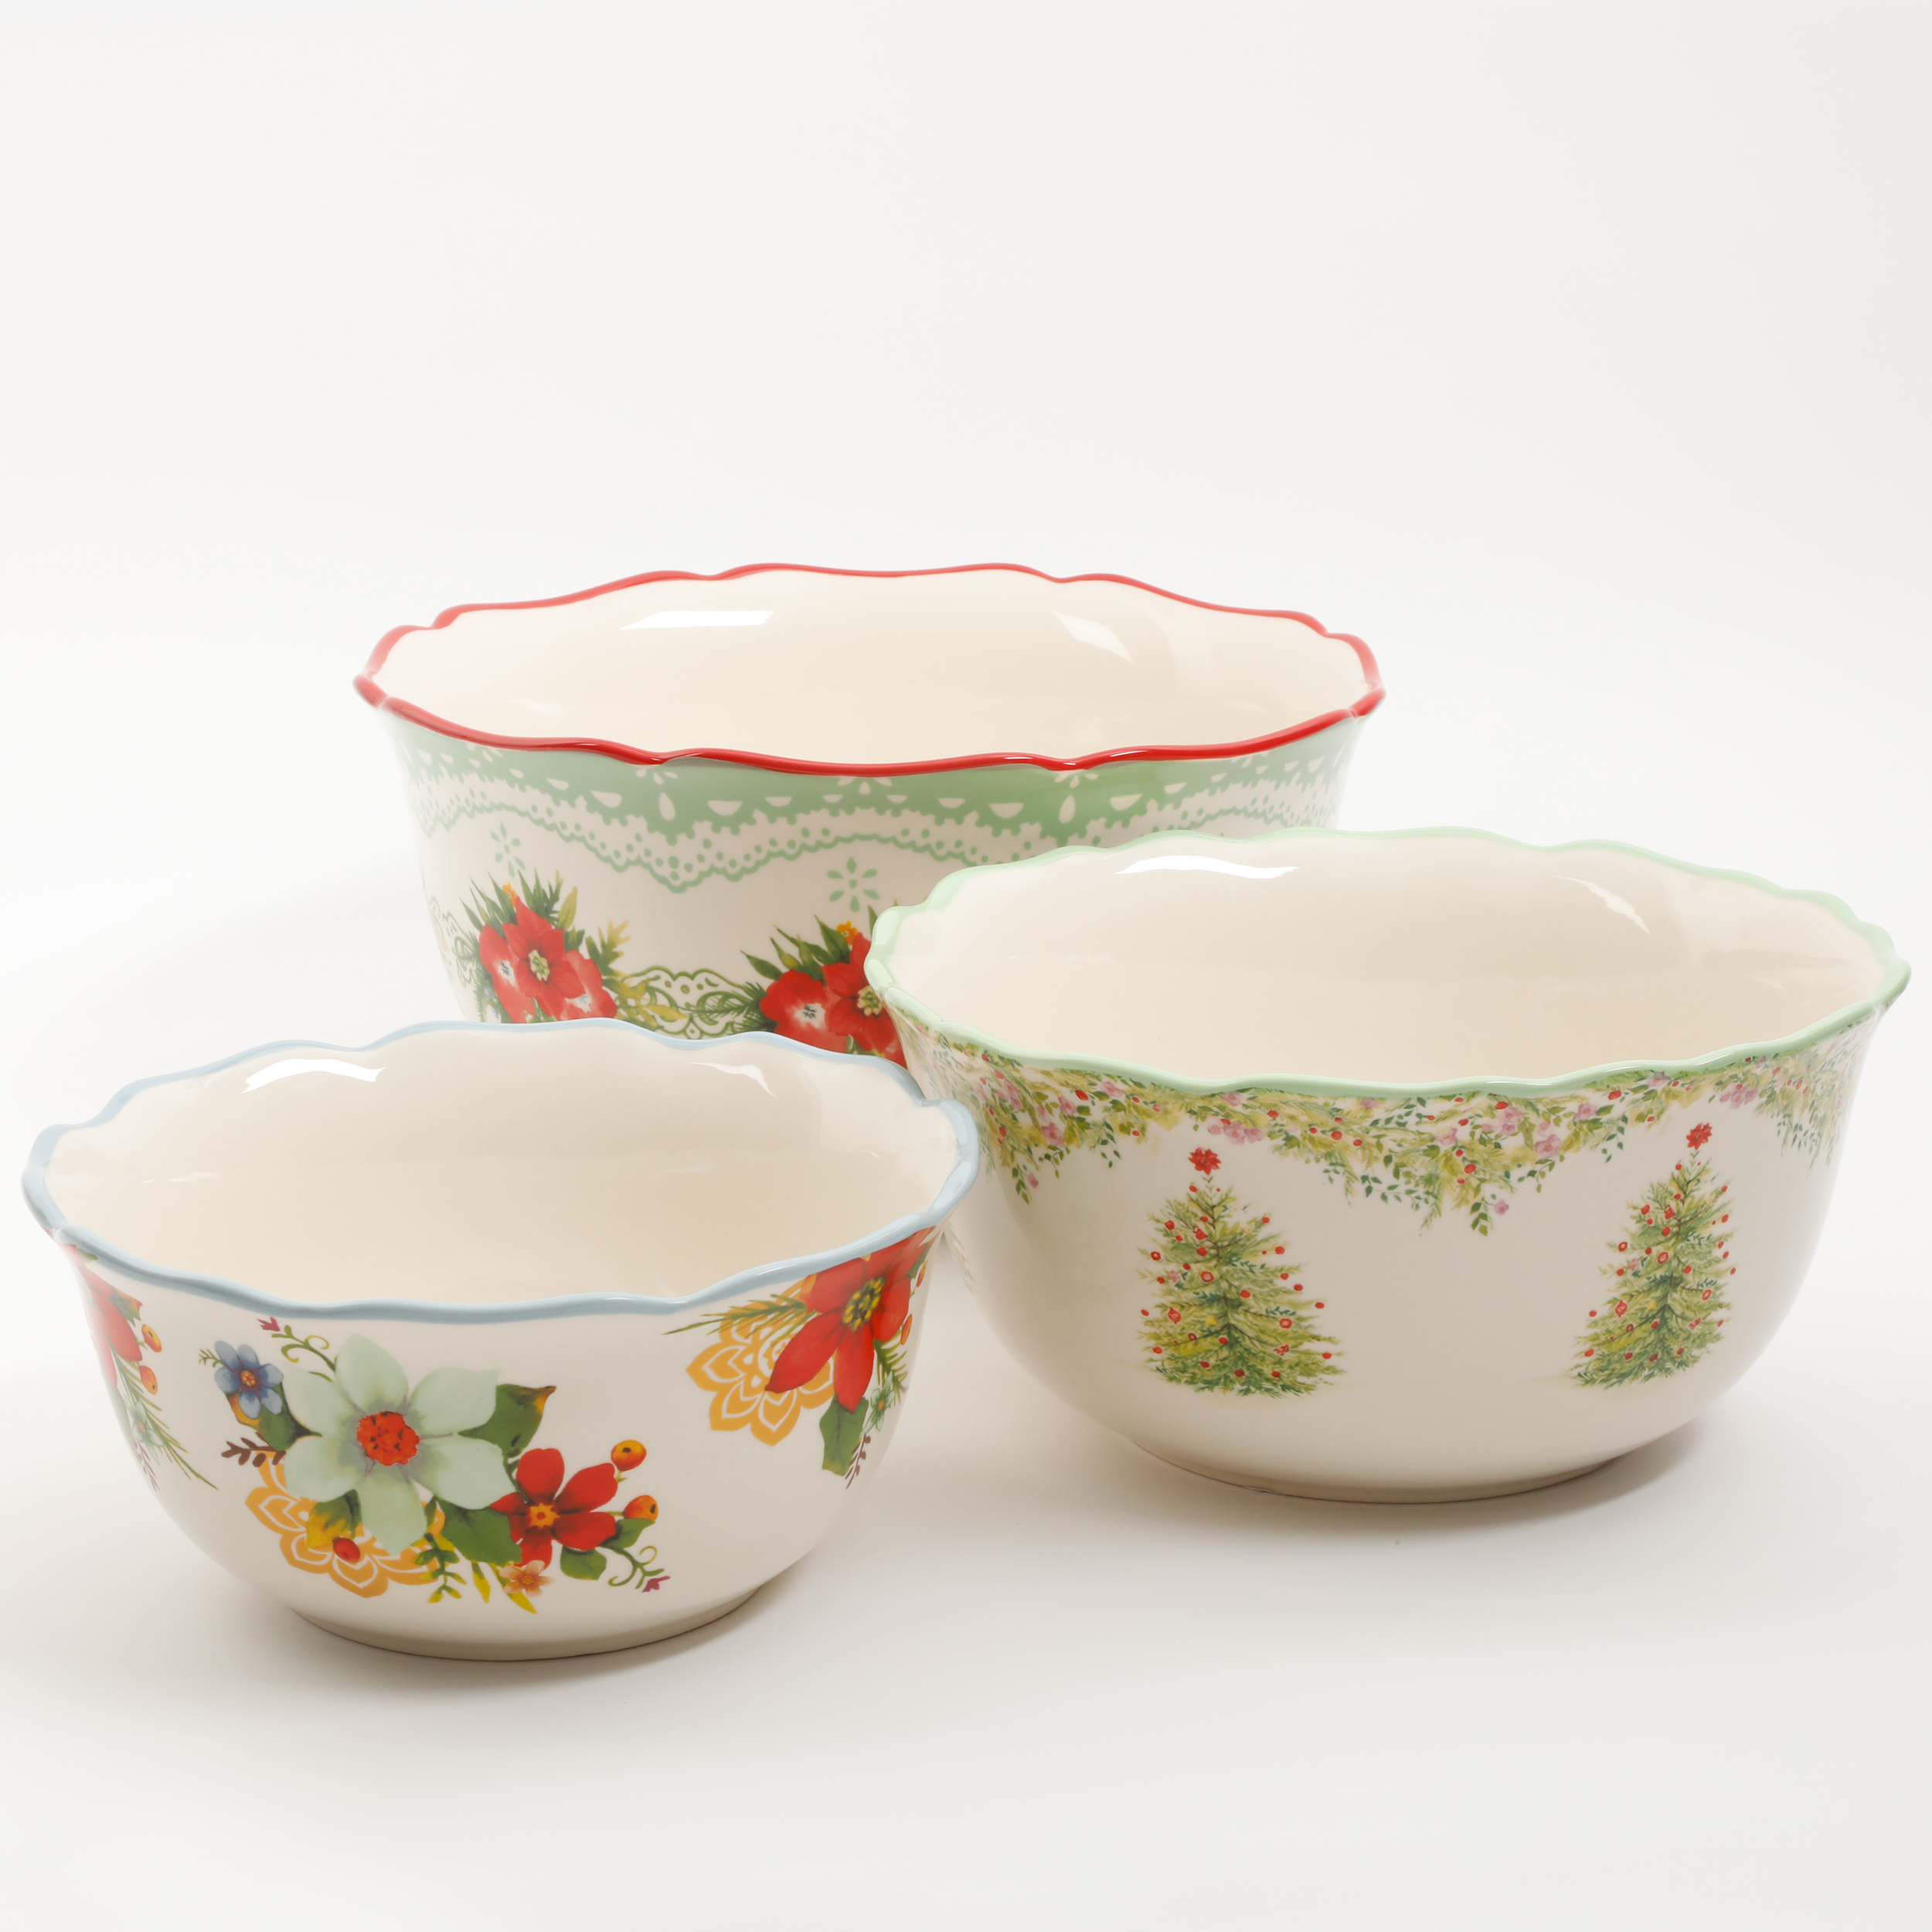 The Pioneer Woman Mint Bowl Set, 3 Piece - image 2 of 5